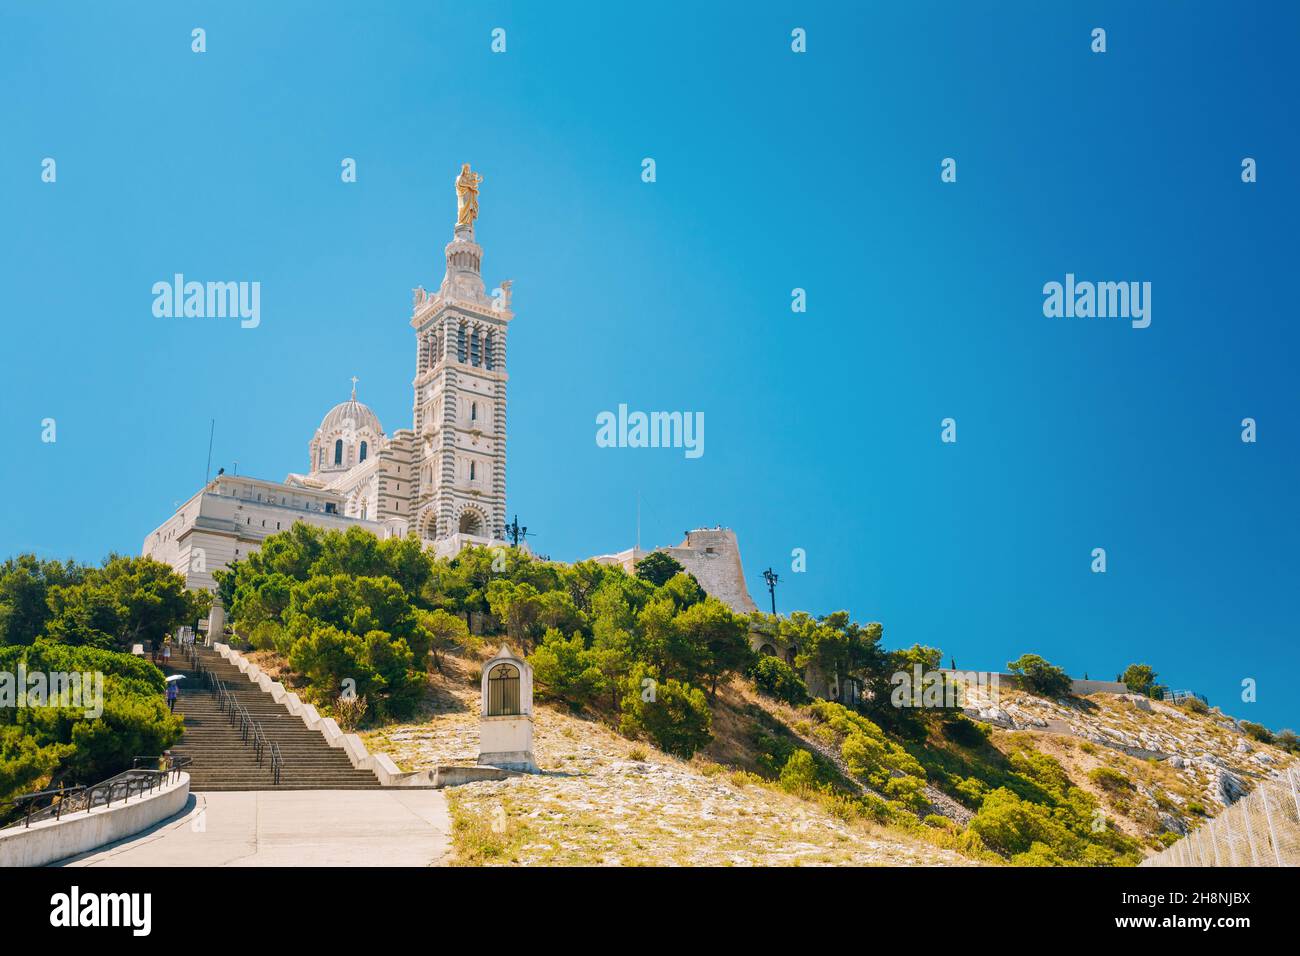 Catholic Basilica of Our Lady of the Guard or Notre Dame De La Garde church at hill in Marseille, France Stock Photo